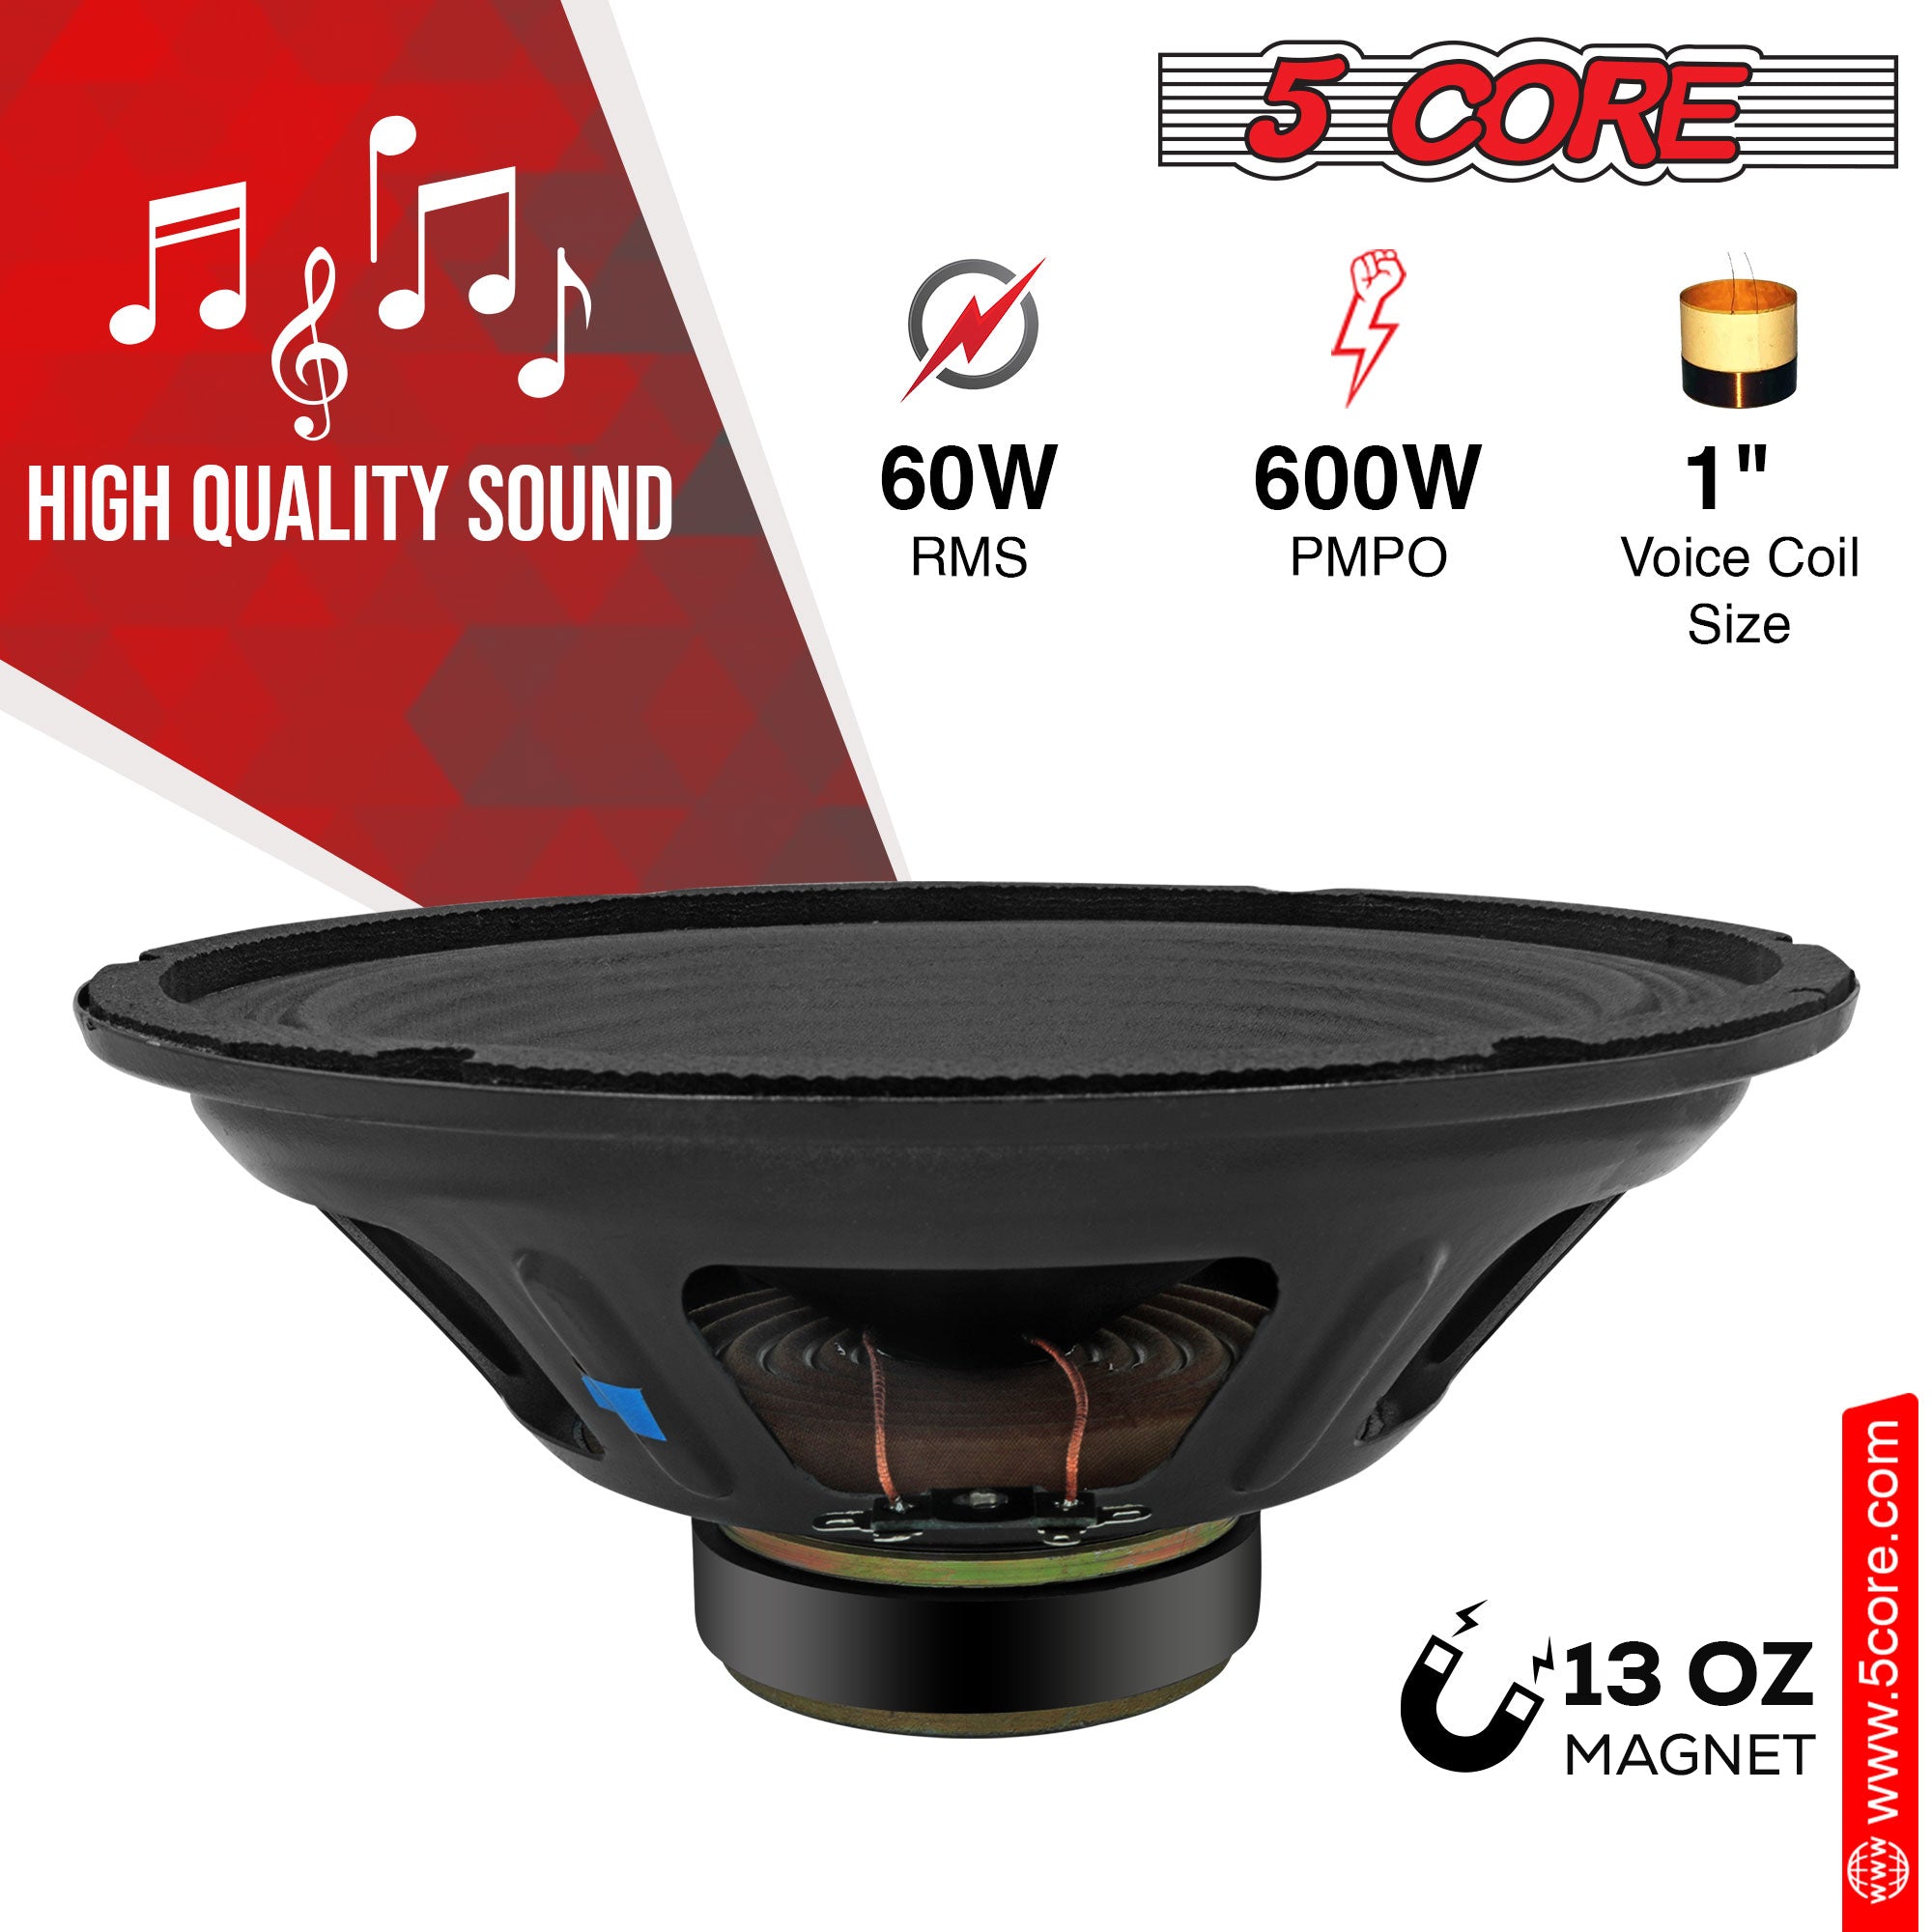 This Speaker has 60w RMS, 600w PMPO, 1 inch Voice Coil Size.